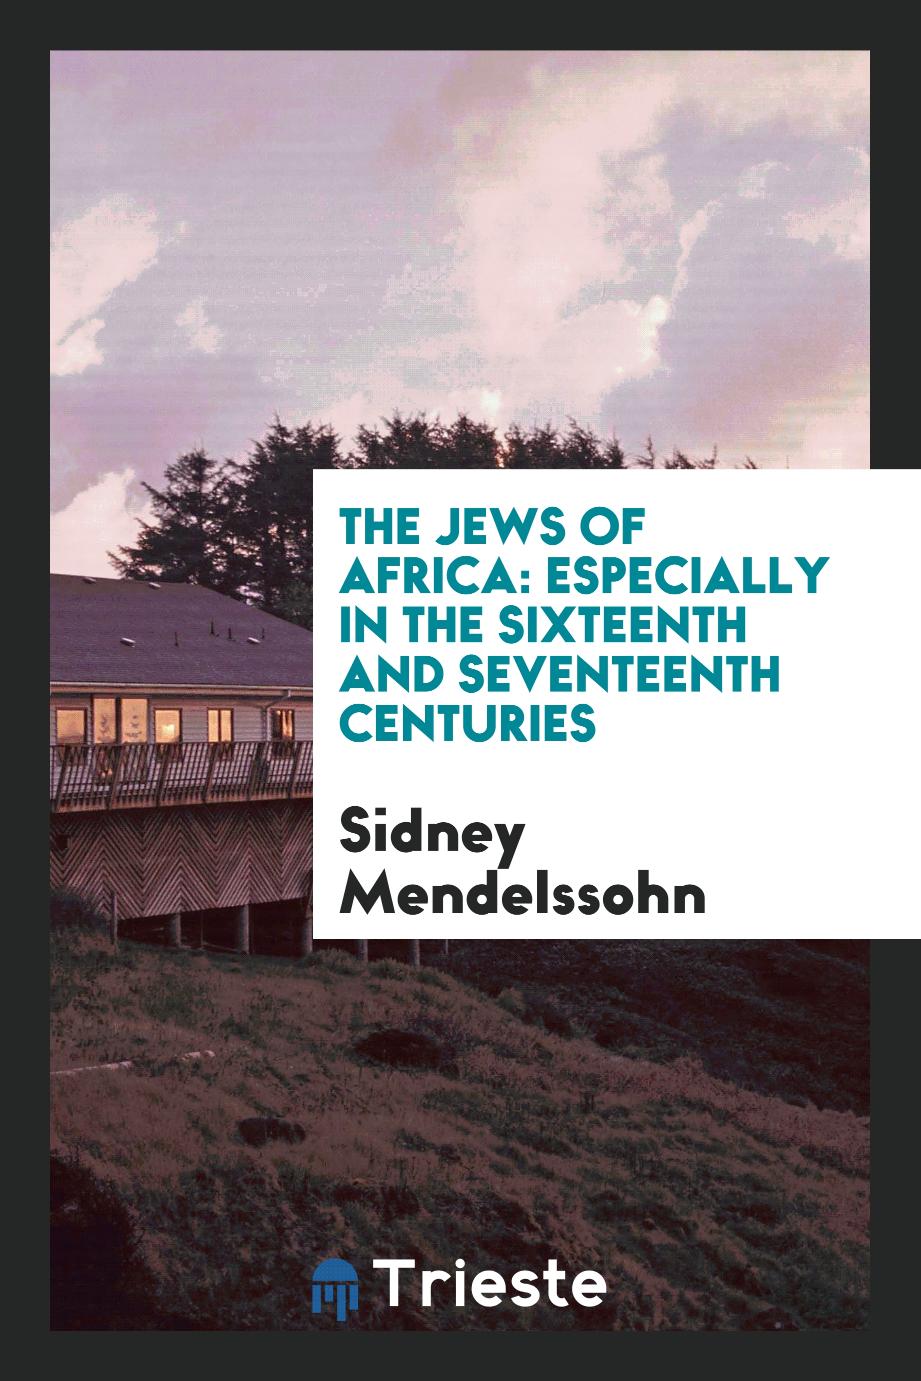 The Jews of Africa: especially in the sixteenth and seventeenth centuries